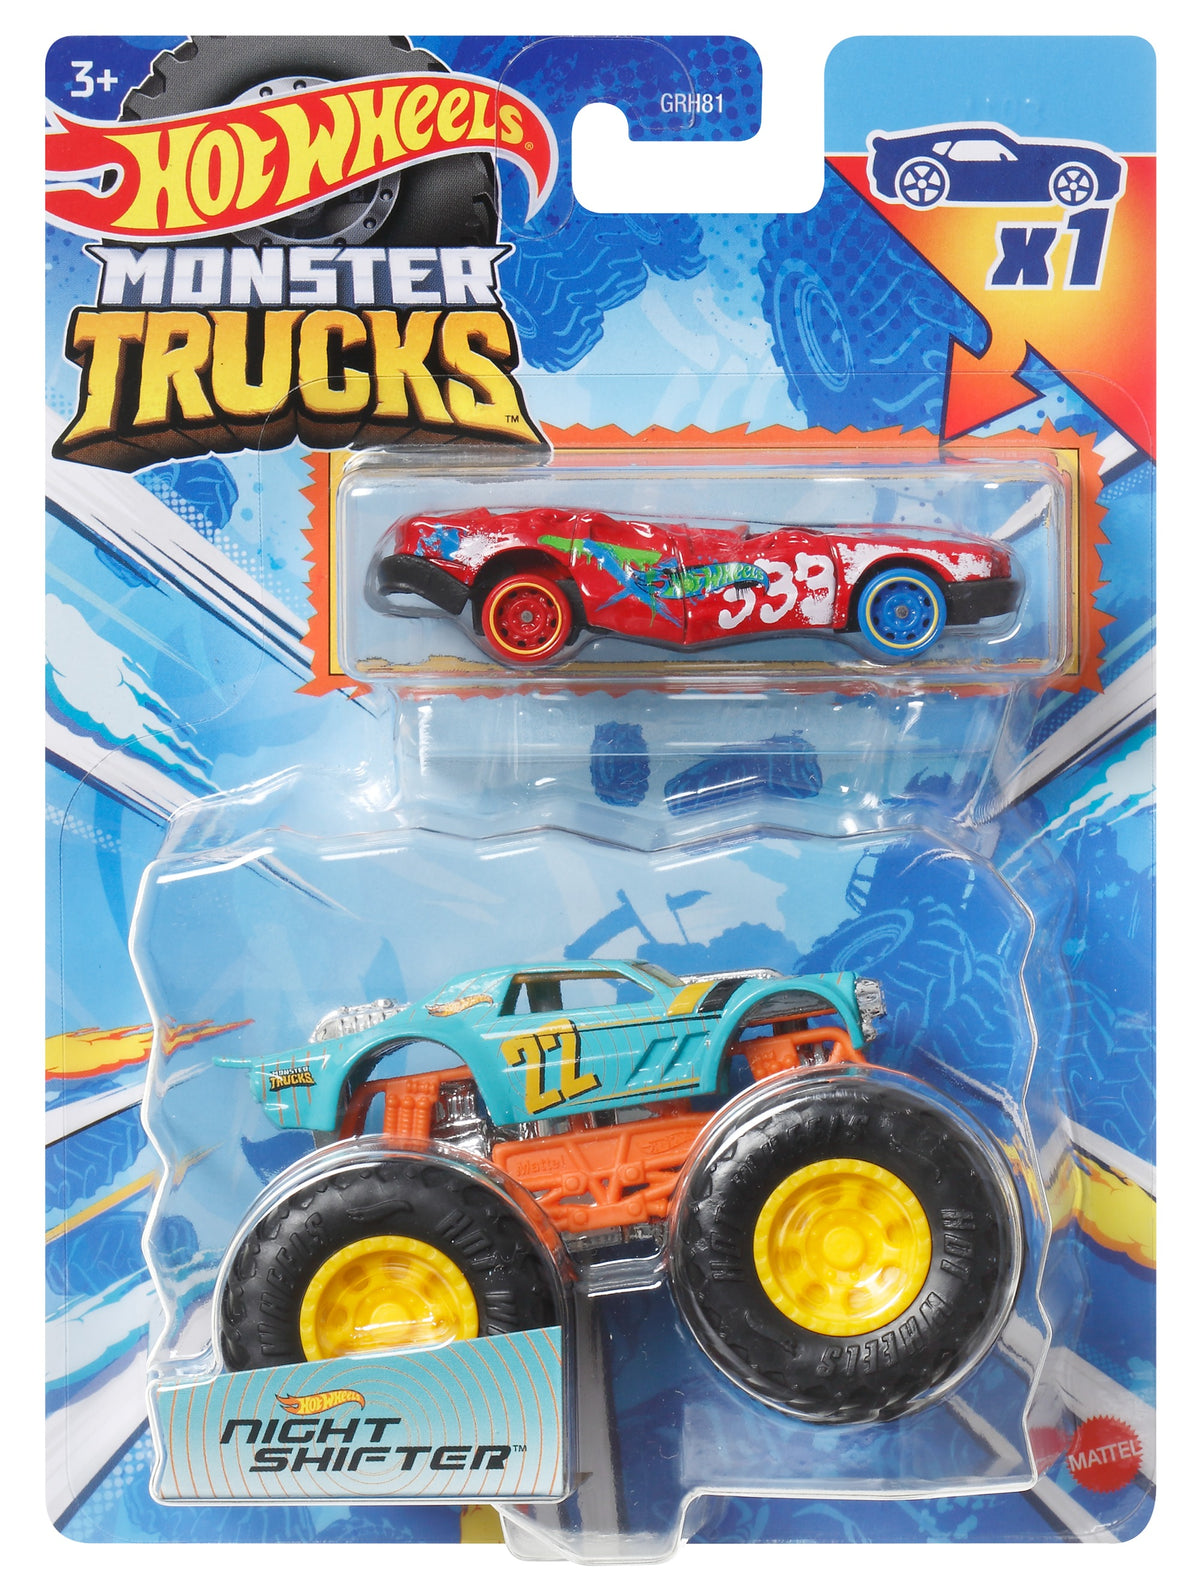 Hot Wheels 1:64 Scale Monster Trucks Night Shifter Vehicle Pack of 2